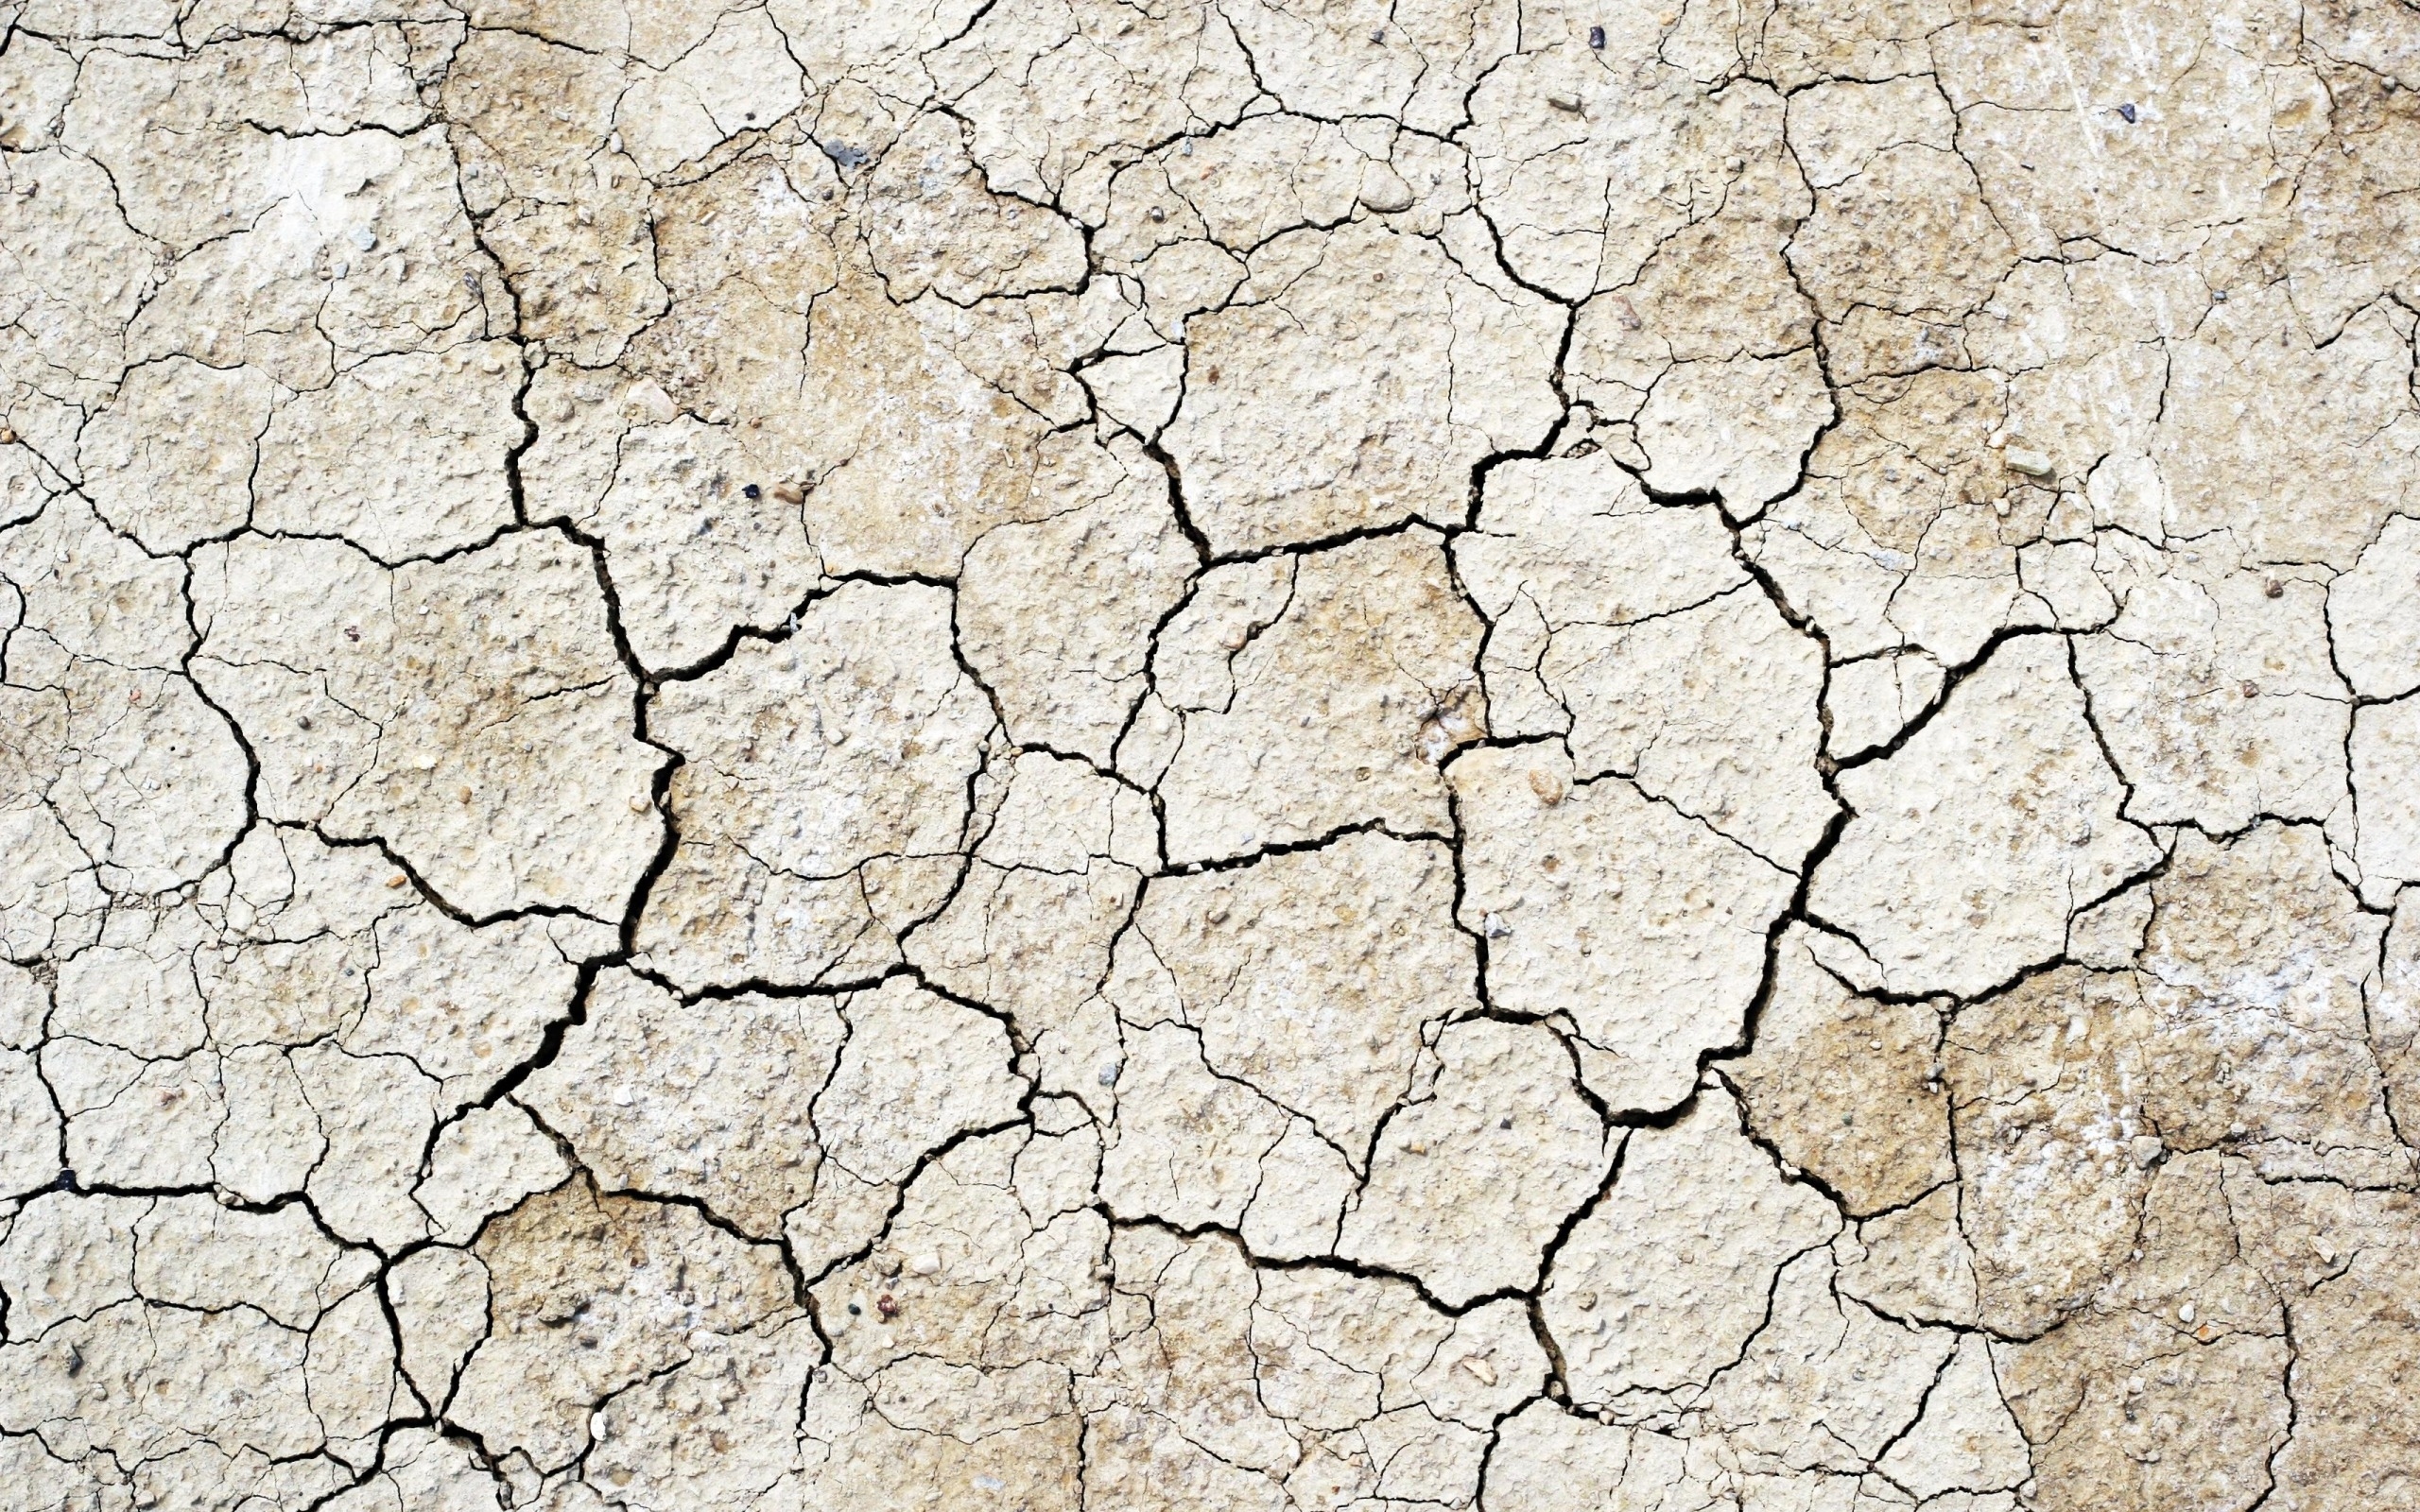 cracked ground earth, stone, texture, background, download background, image